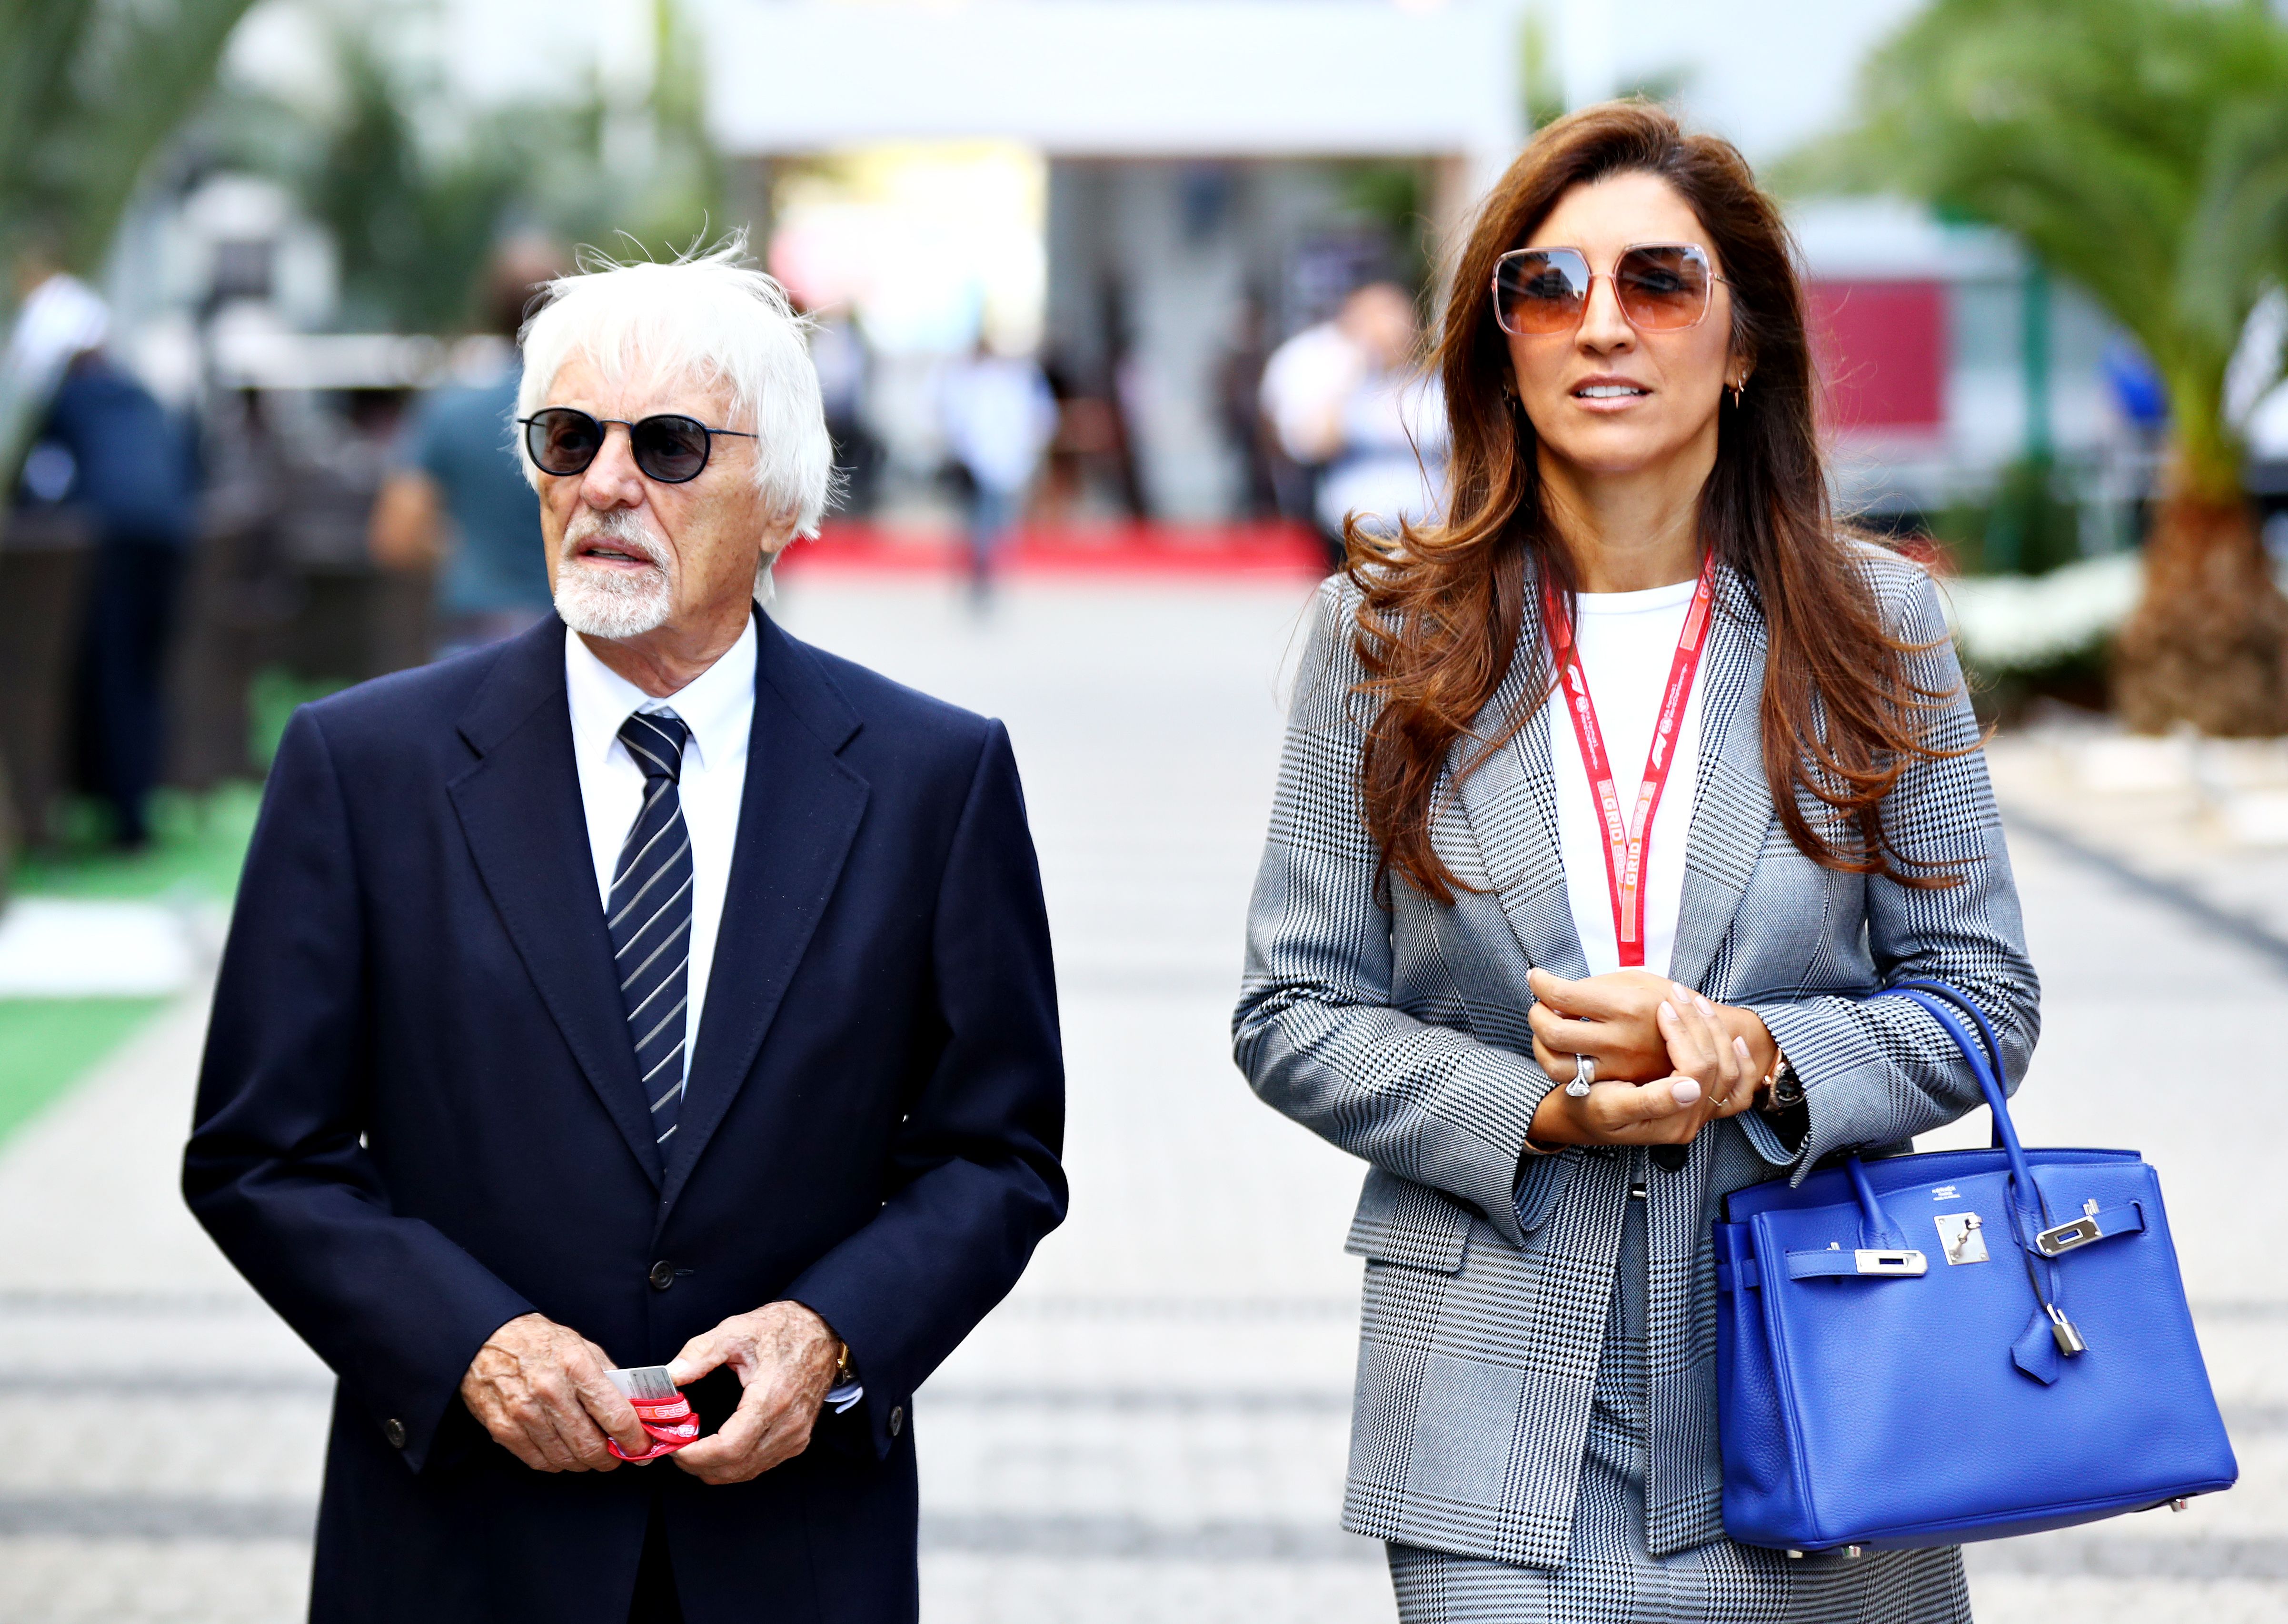 Bernie Ecclestone, Chairman Emeritus of the Formula One Group, and his wife Fabiana walk in the Paddock before the F1 Grand Prix of Russia at Sochi Autodrom on September 29, 2019 | Photo: Getty Images